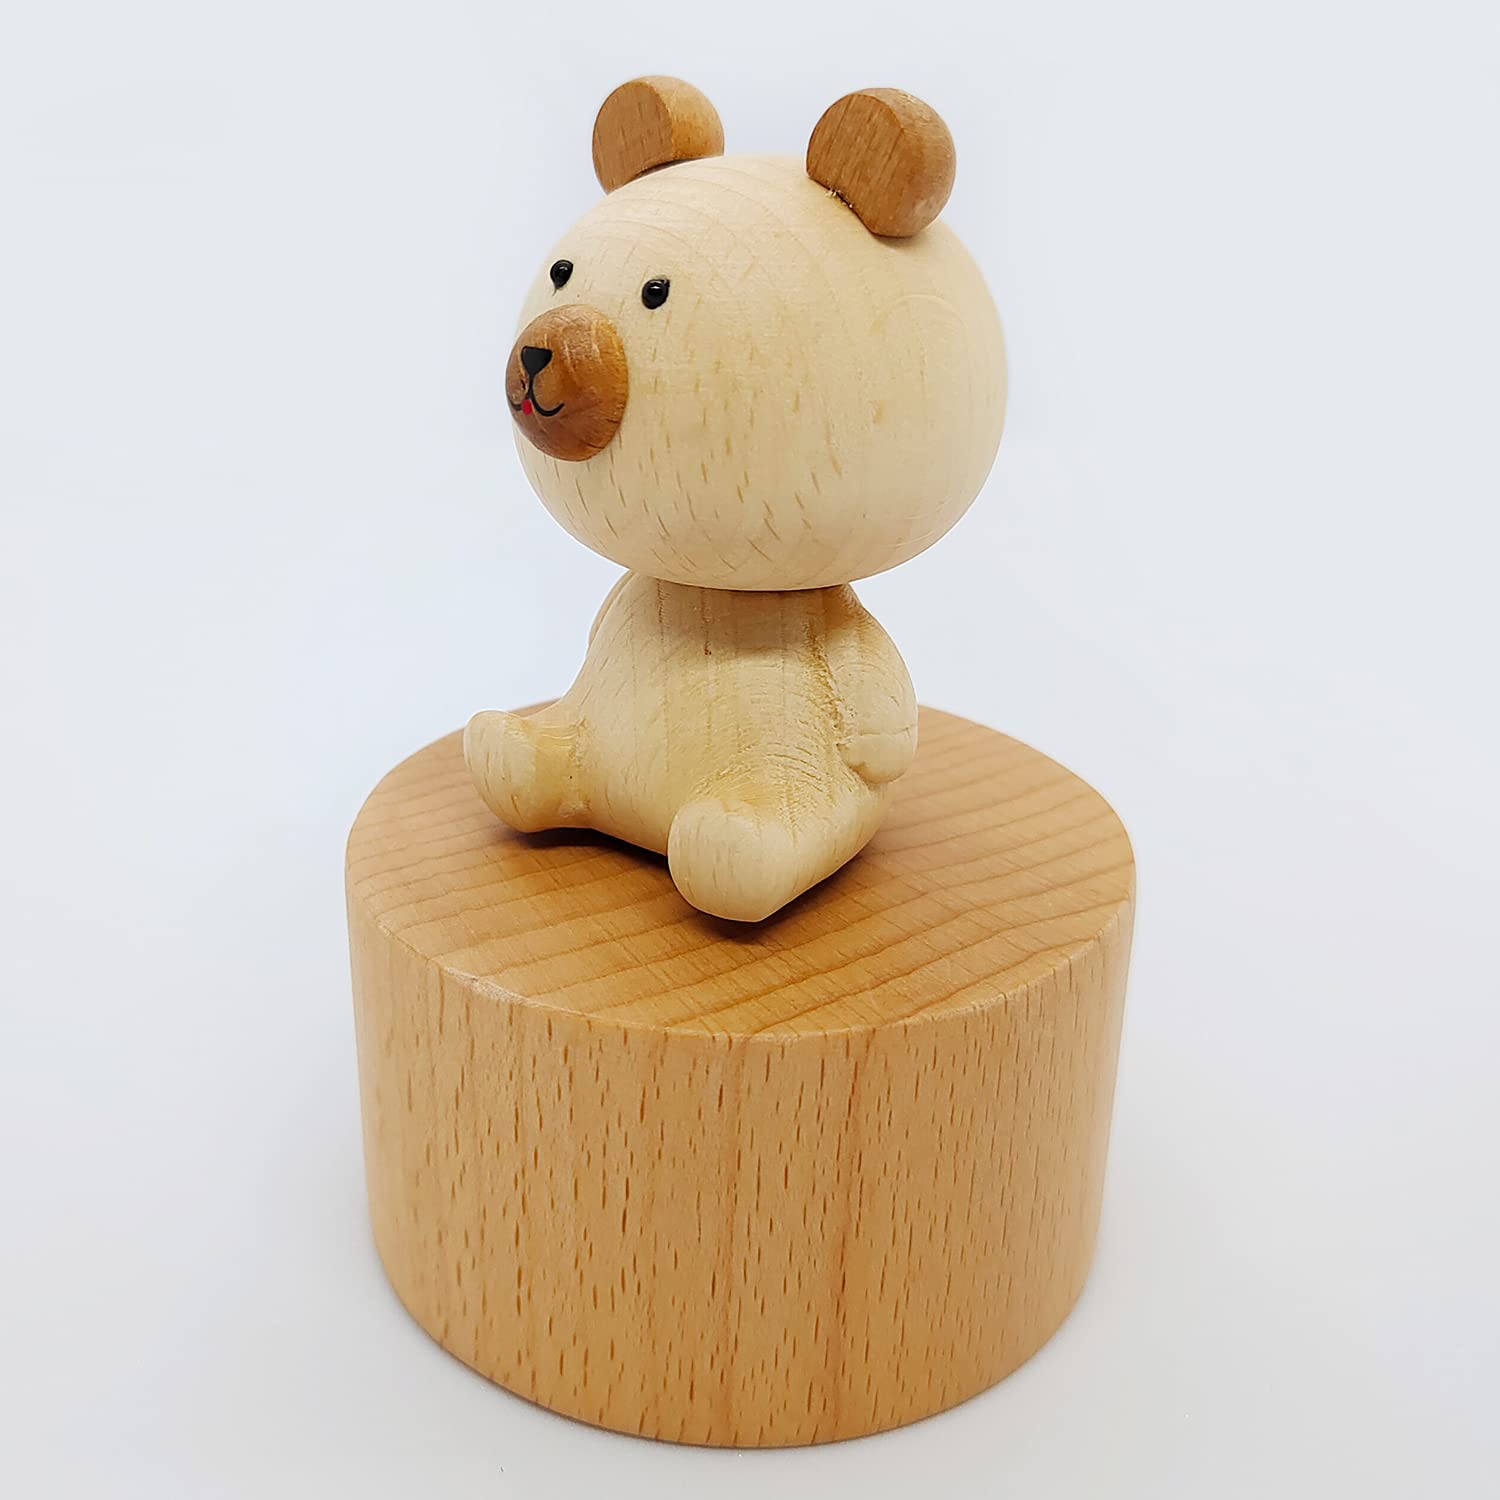 LILYXIN Cute Little Bear Mini Music Box, Little Animals Wooden Mechanical Music Box, The Music Box Gift That Sings Castle in The Sky, Best Gift for Boy Girl Friends Singing Music Gift Box